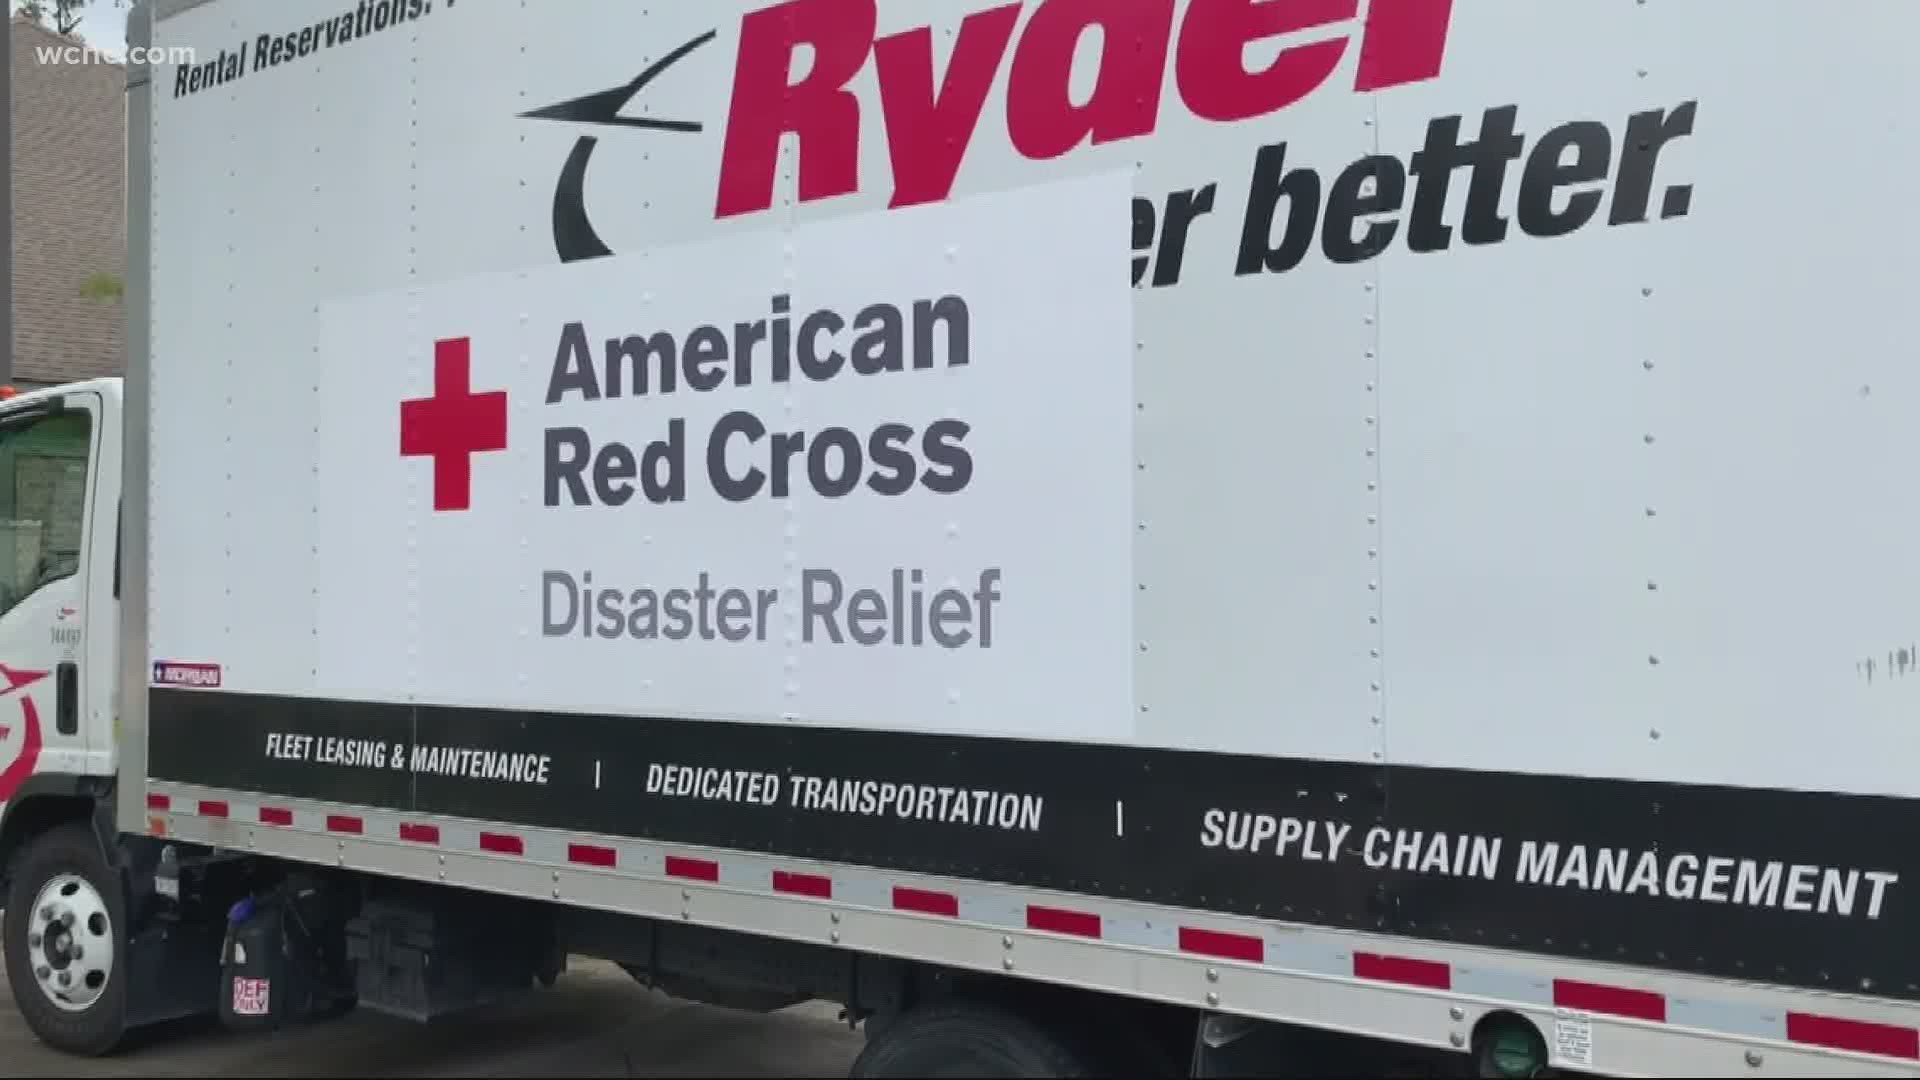 American Red Cross volunteers from the Carolina's are traveling to provide food and shelter to storm victims.